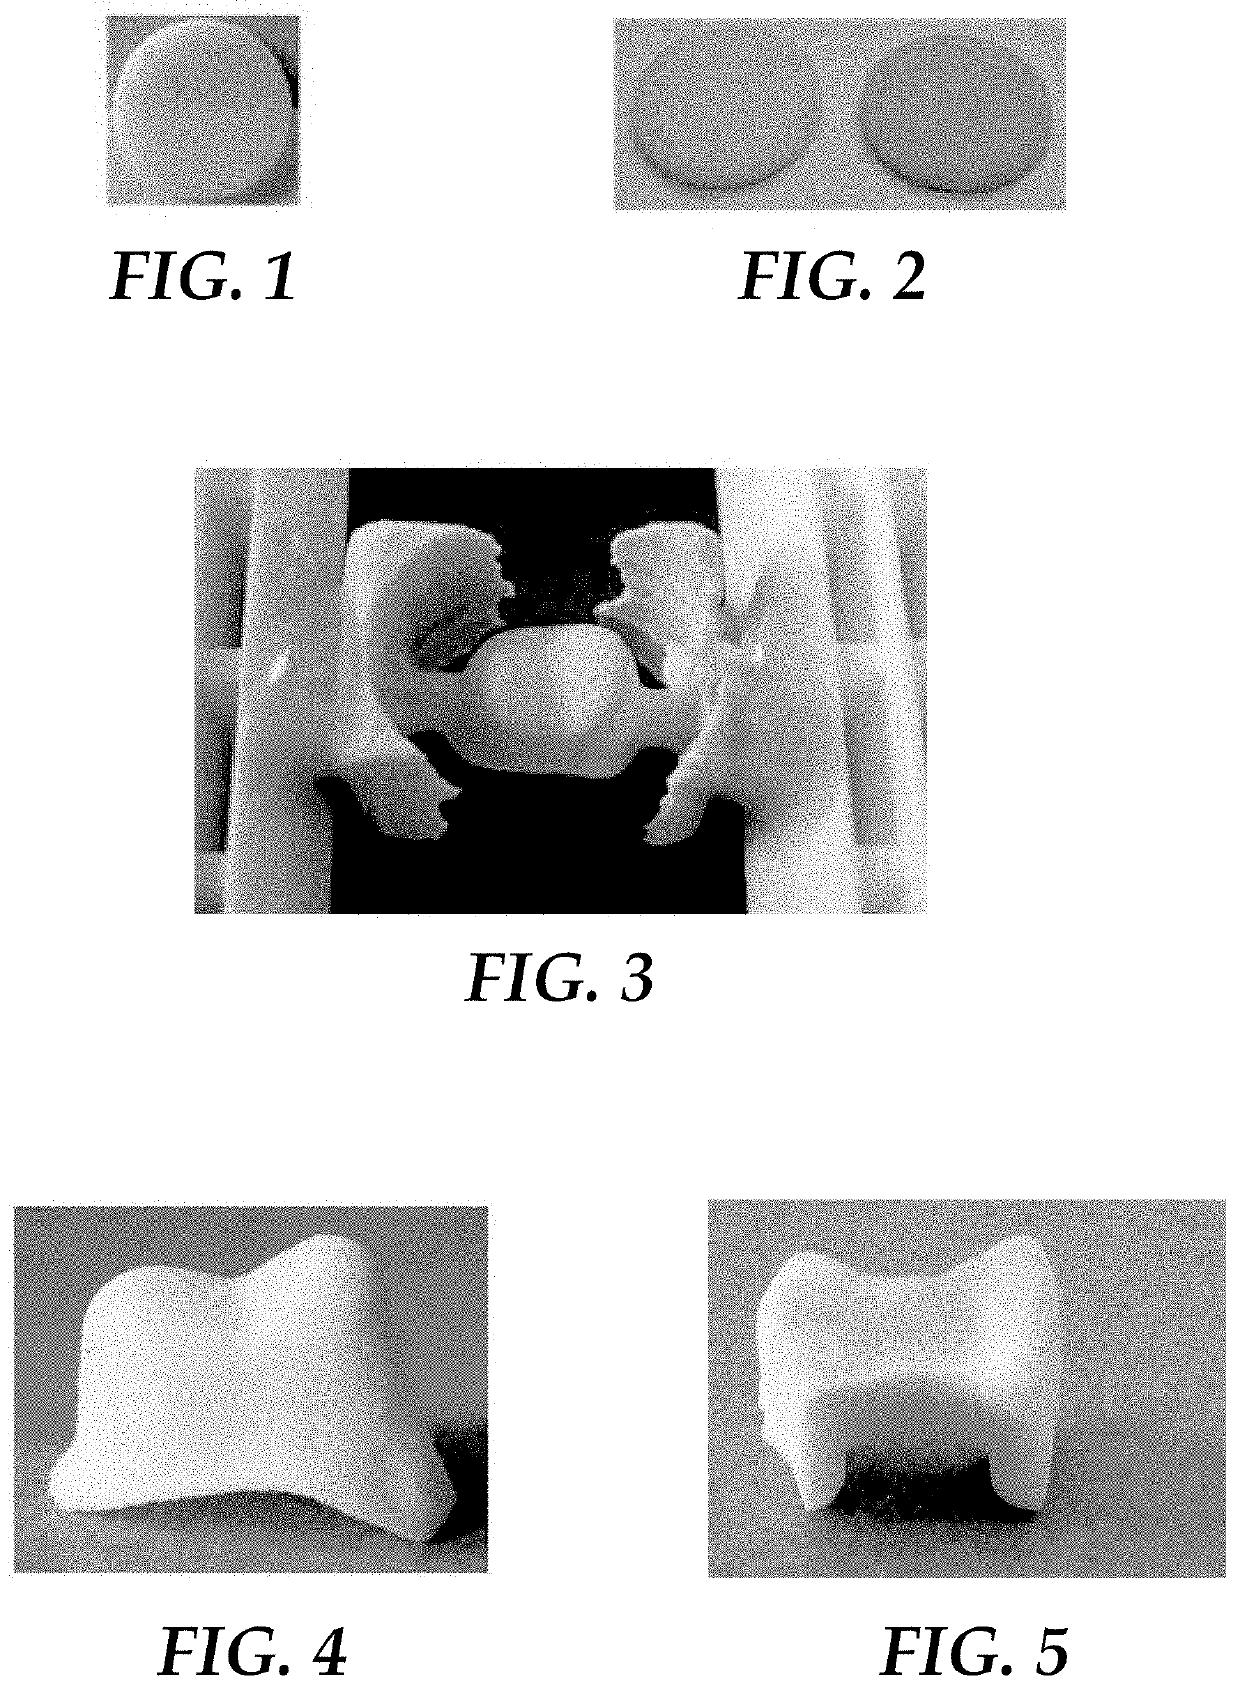 Process for producing a sintered lithium disilicate glass ceramic dental restoration and kit of parts